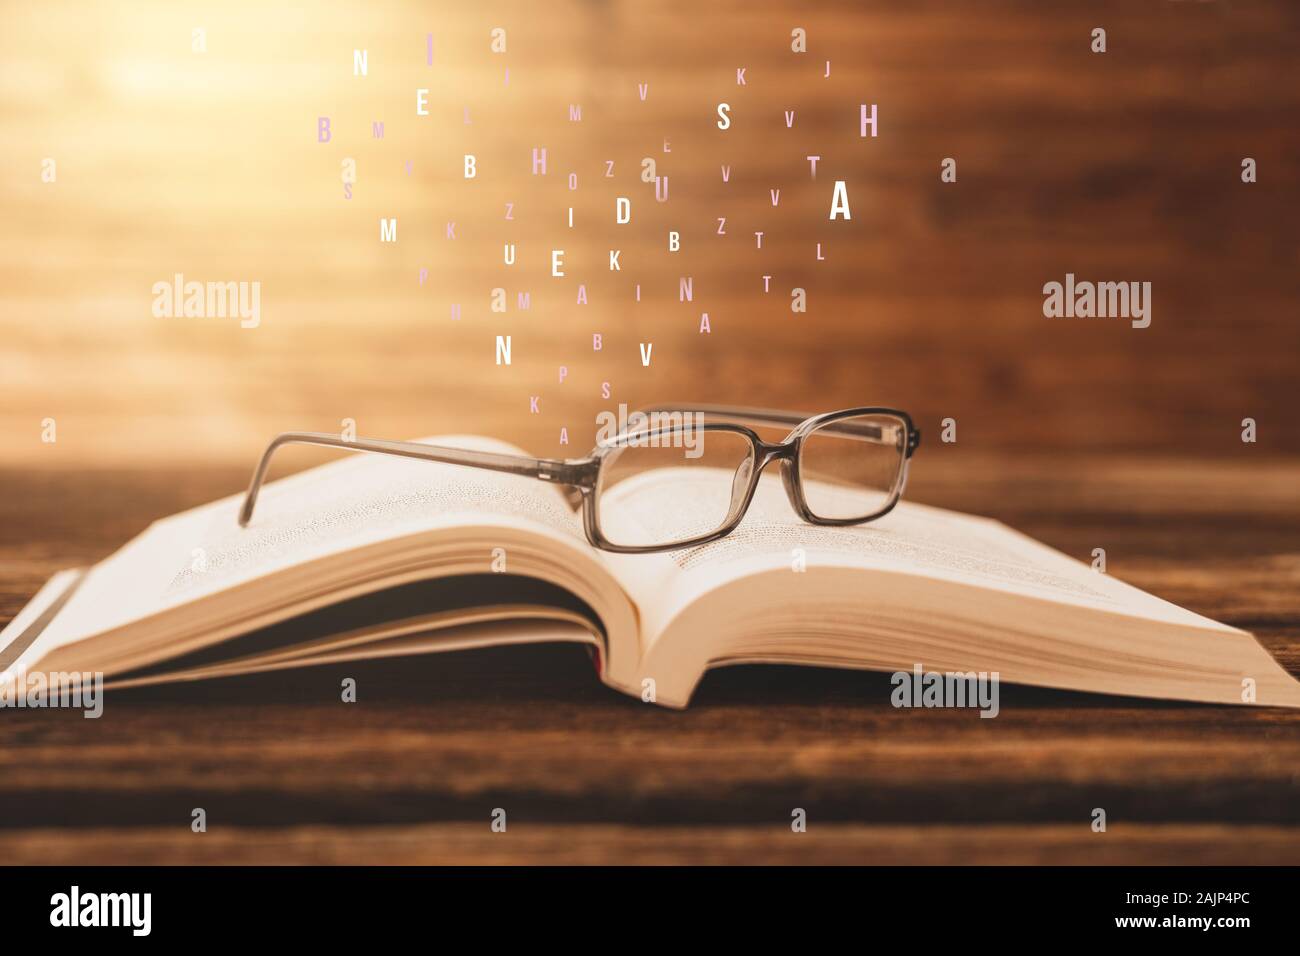 Eyeglasses on an open book and abstract letters on wooden table with vintage background Stock Photo